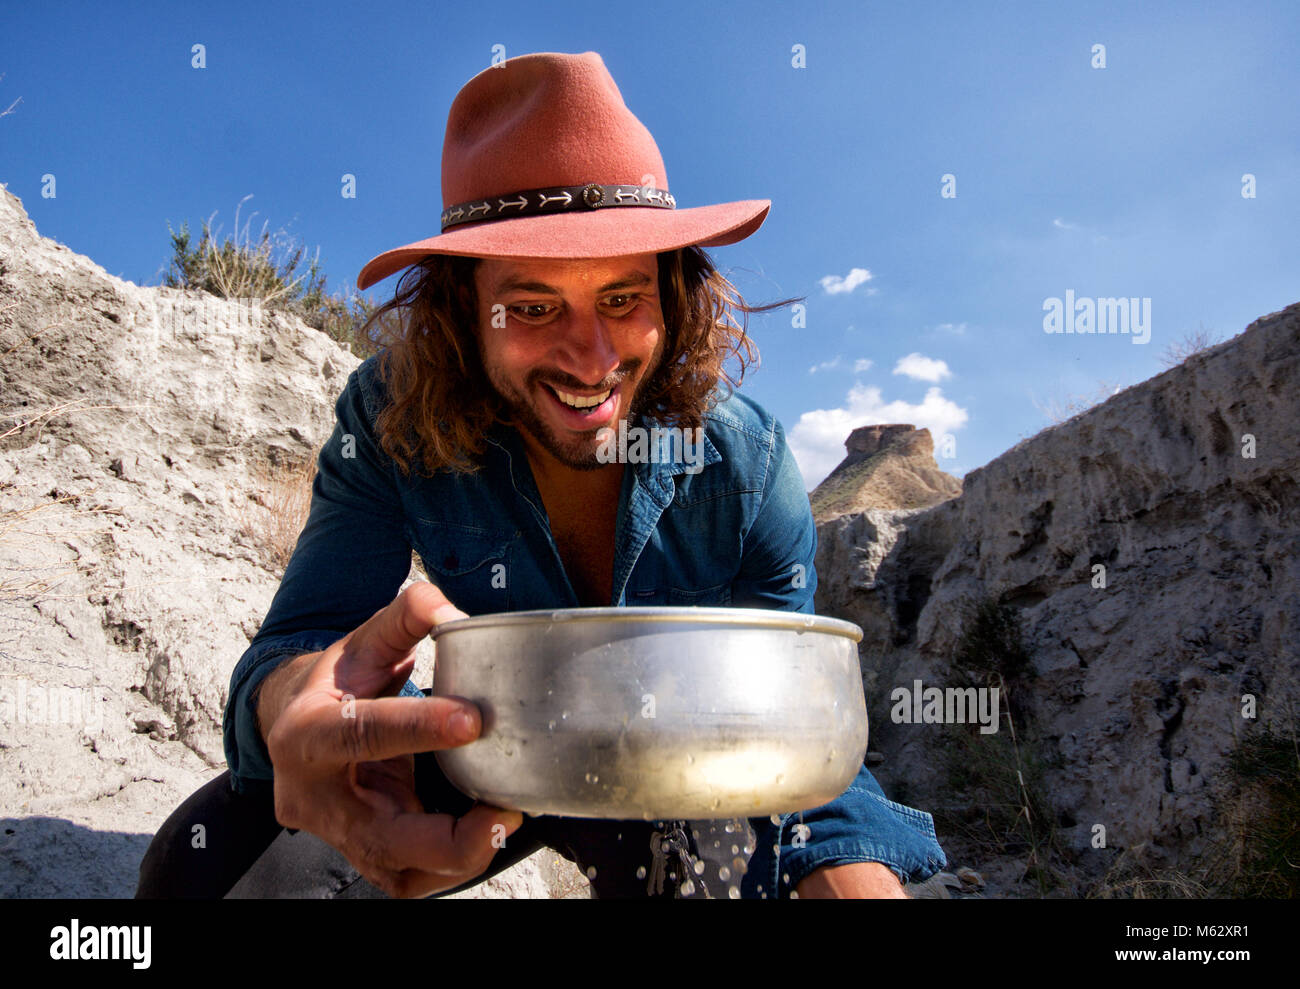 Cowboy gold panner happy at finding gold which reflects on his face Stock Photo